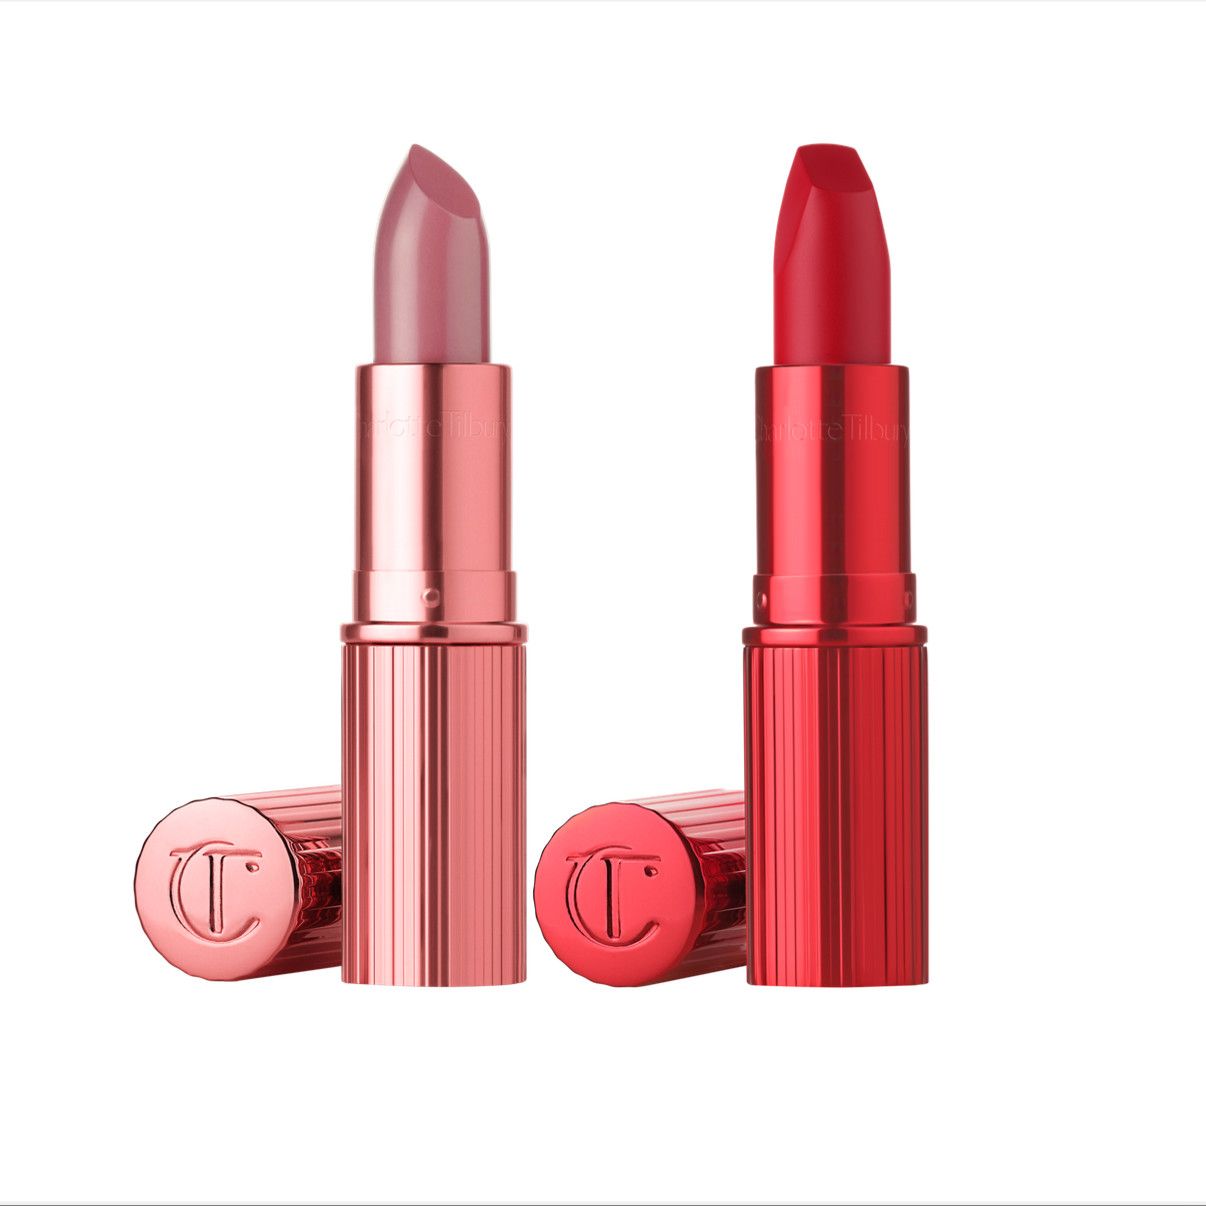 NEW! CHARLOTTE'S HOLLYWOOD BEAUTY ICON LIPSTICK DUO | Charlotte Tilbury (US)